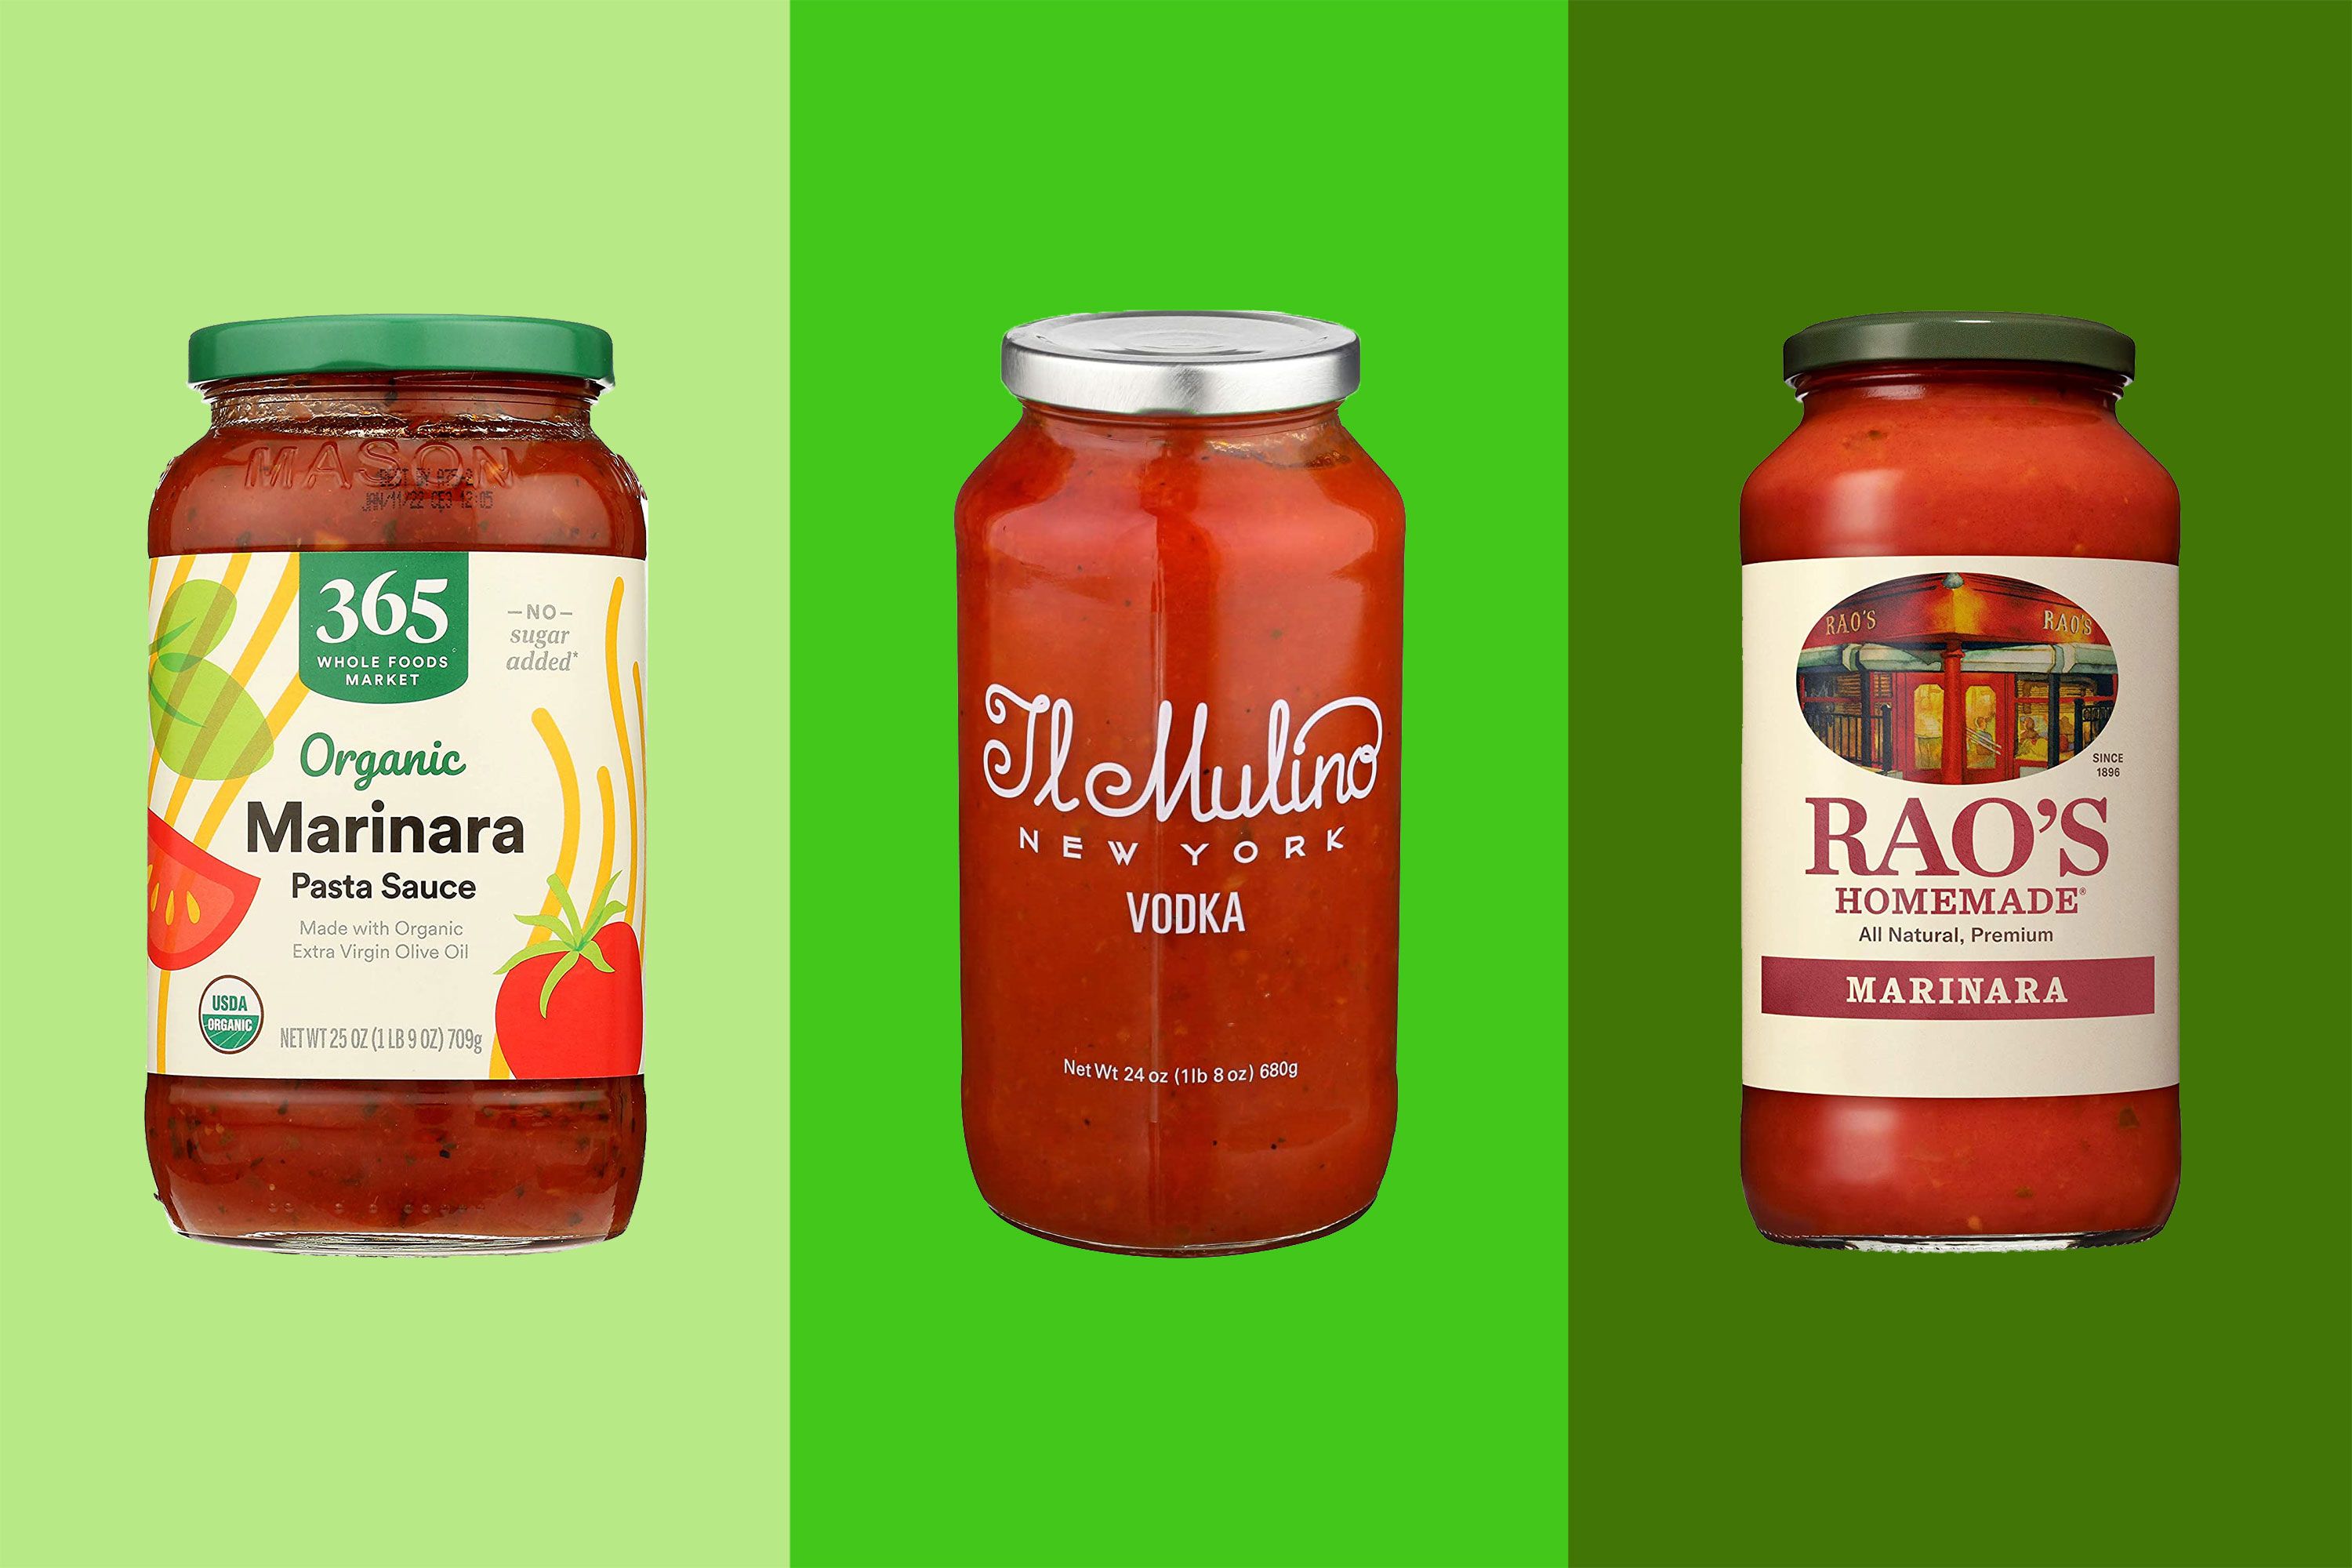 11 Best Jarred Tomato Sauces 2021 | The Strategist